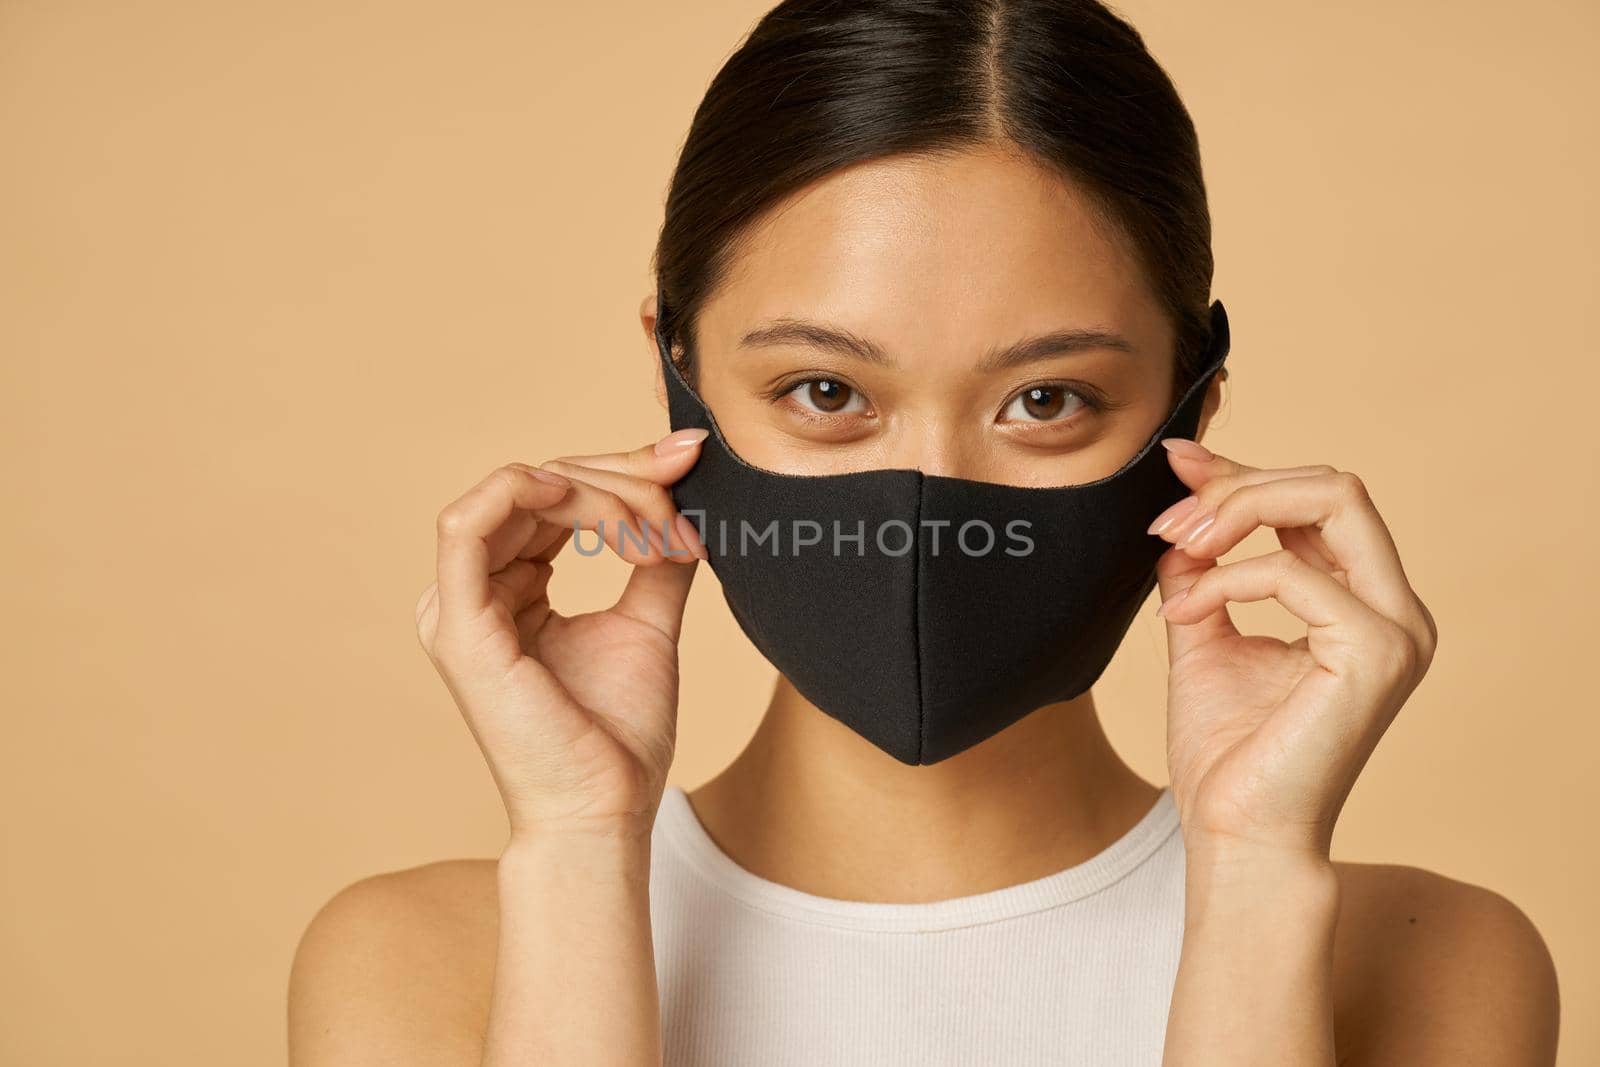 Charming young woman adjusting black facial mask and looking at camera, posing isolated over beige background by friendsstock